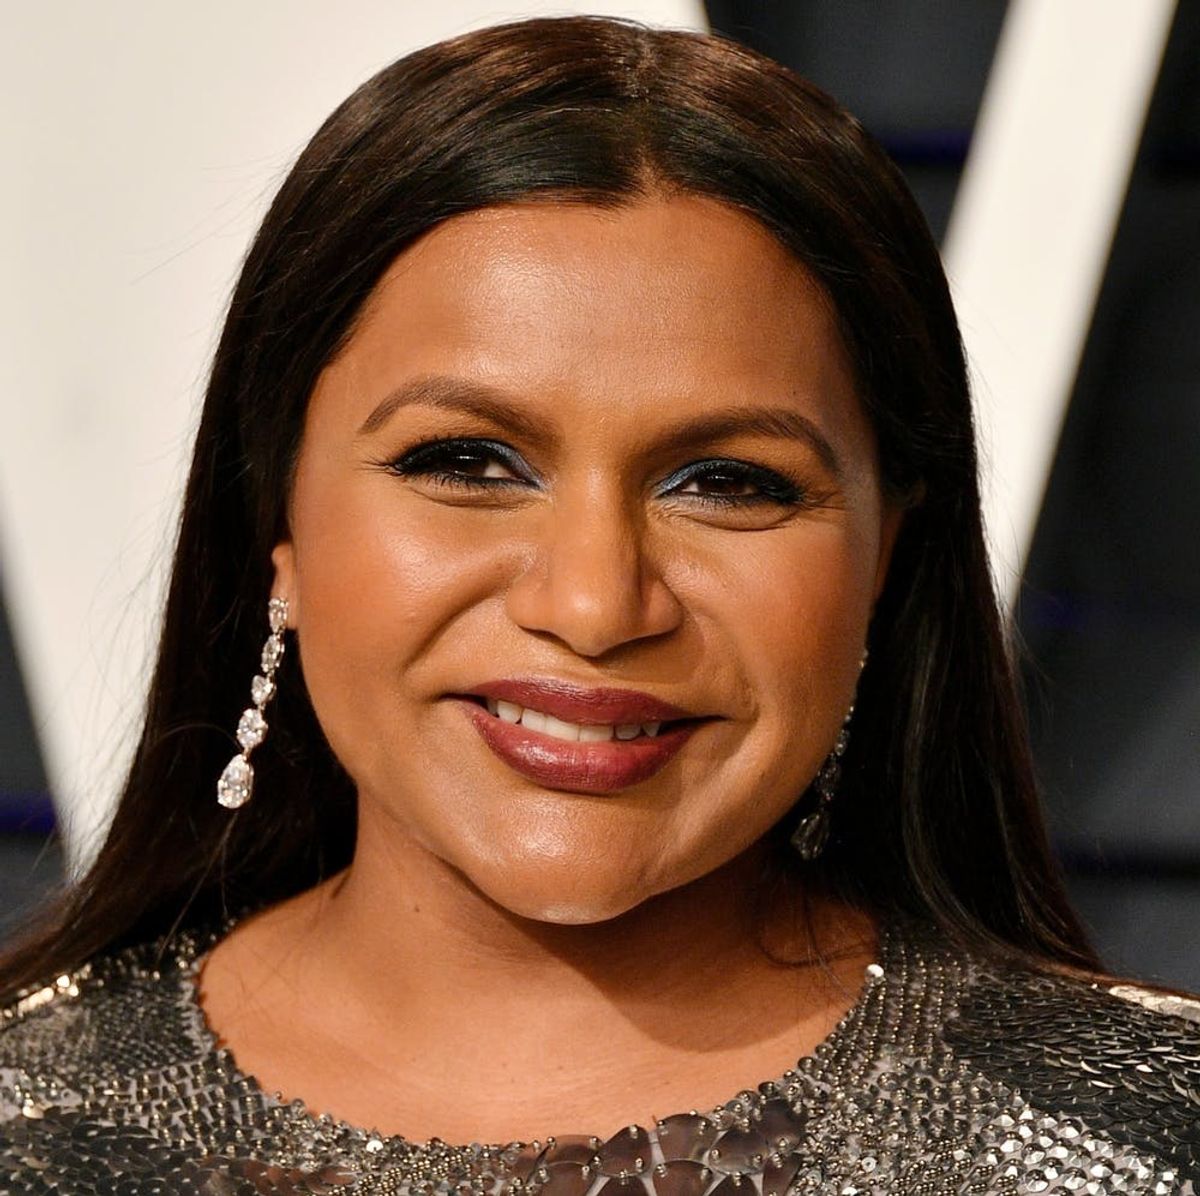 Mindy Kaling Is Turning Her ‘Complicated’ Childhood Into a New Netflix Comedy Series